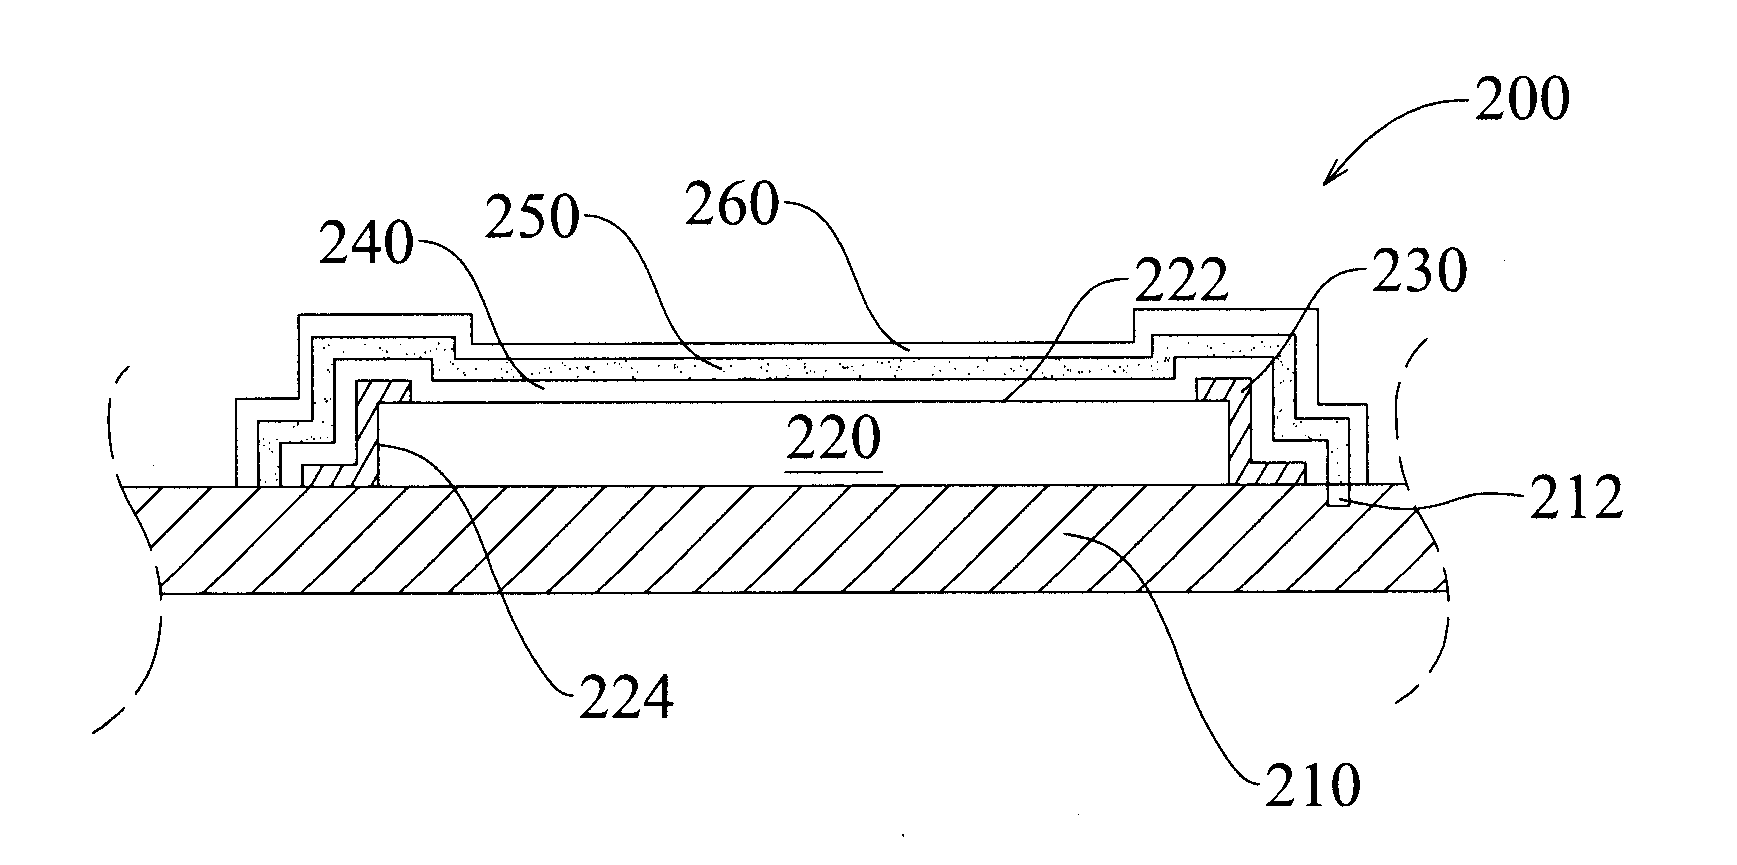 Fingerprint sensor chip package method and the package structure thereof